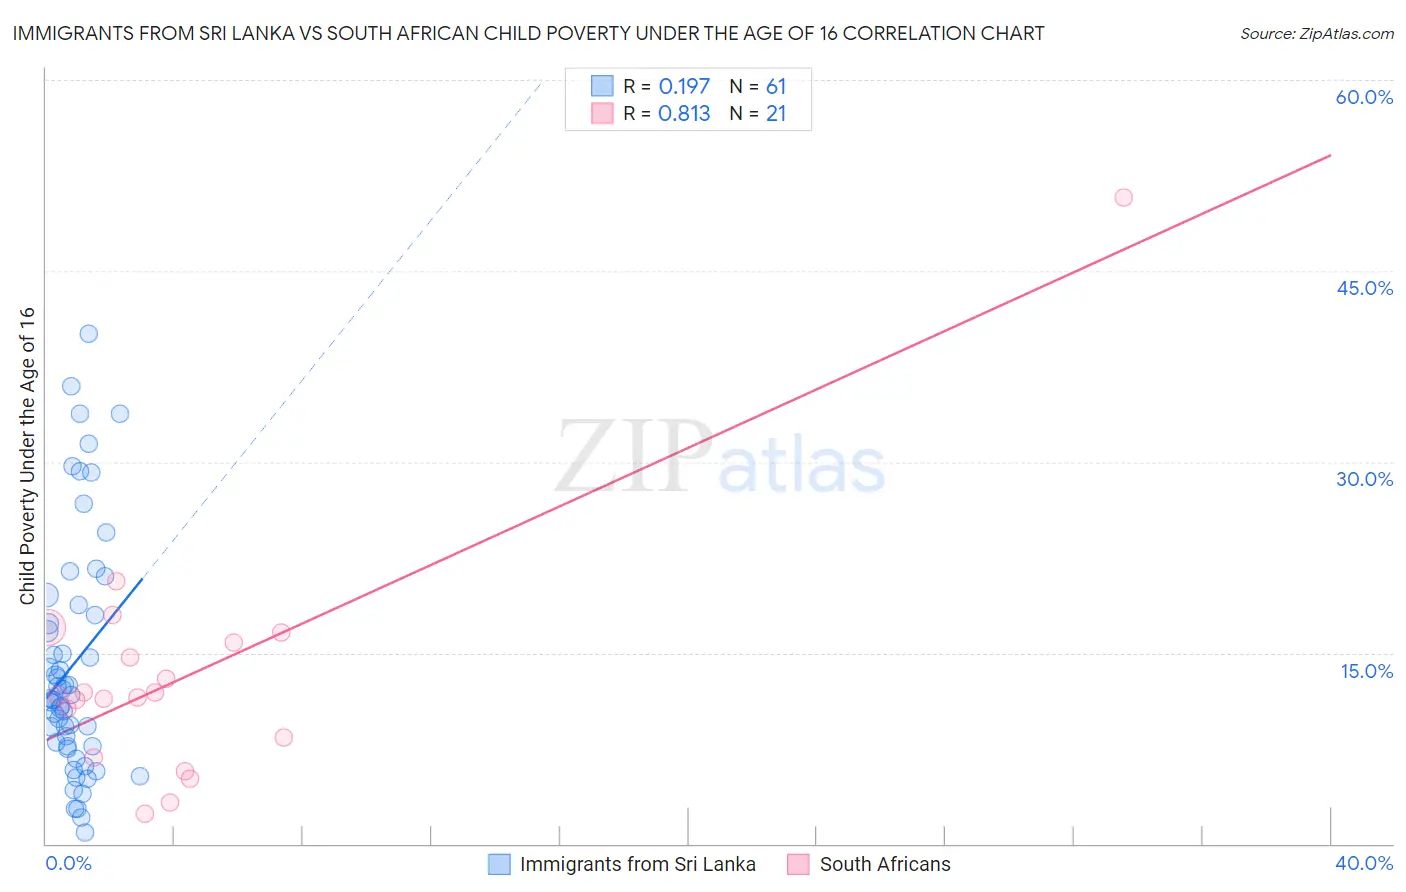 Immigrants from Sri Lanka vs South African Child Poverty Under the Age of 16